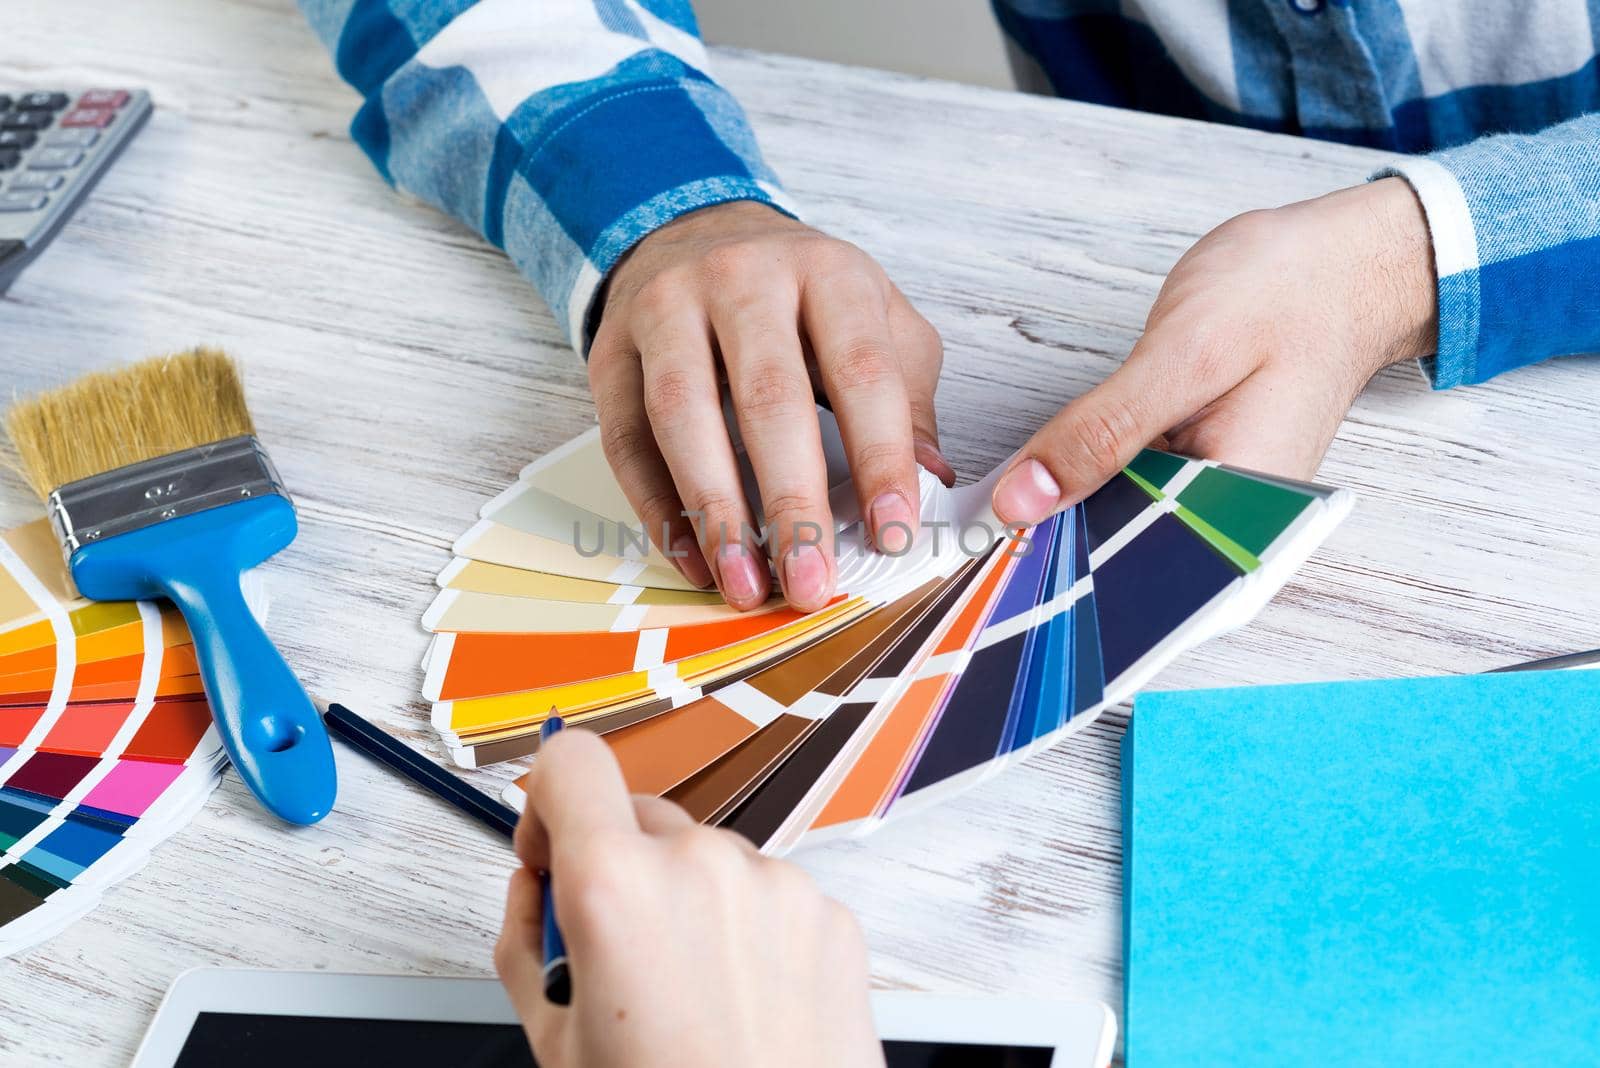 Interior designer choosing colors from swatches at wooden desk. Office workplace in design studio. Selection of color palette for design. Professional house renovation and interior redesign.